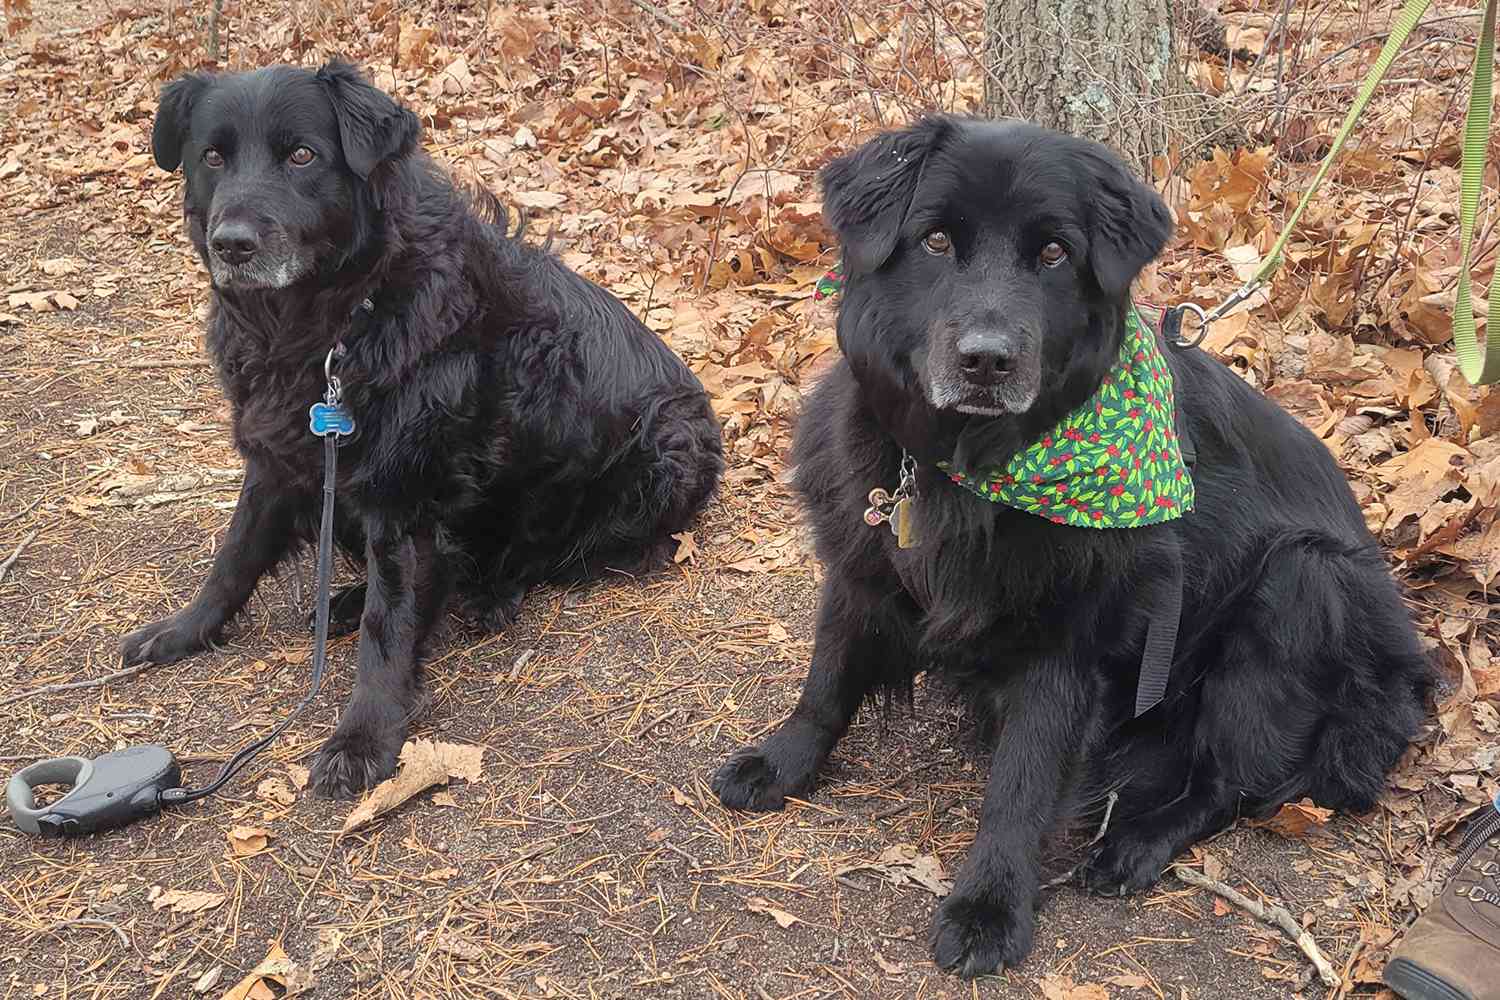 Dog Siblings Reunite After 13 Years Apart When DNA Test Reveals the Pups Live in the Same Town (Exclusive)